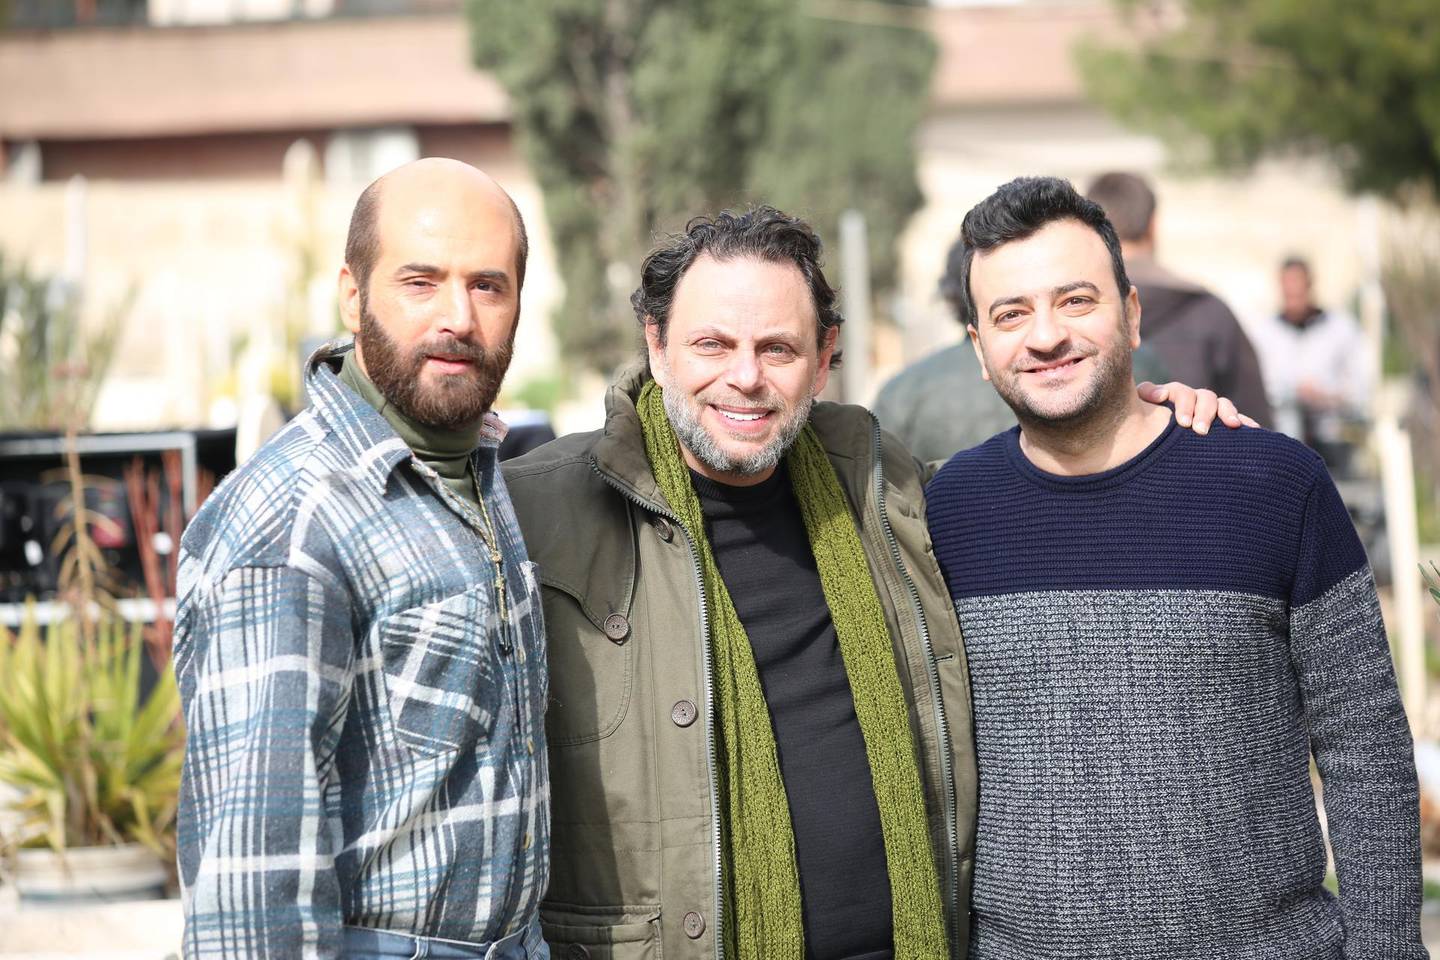 Director Seif Sbei, centre, poses with scriptwriters Yamen Al Hajali, left, and Ali Wajeeh. Courtesy Seif Sbei